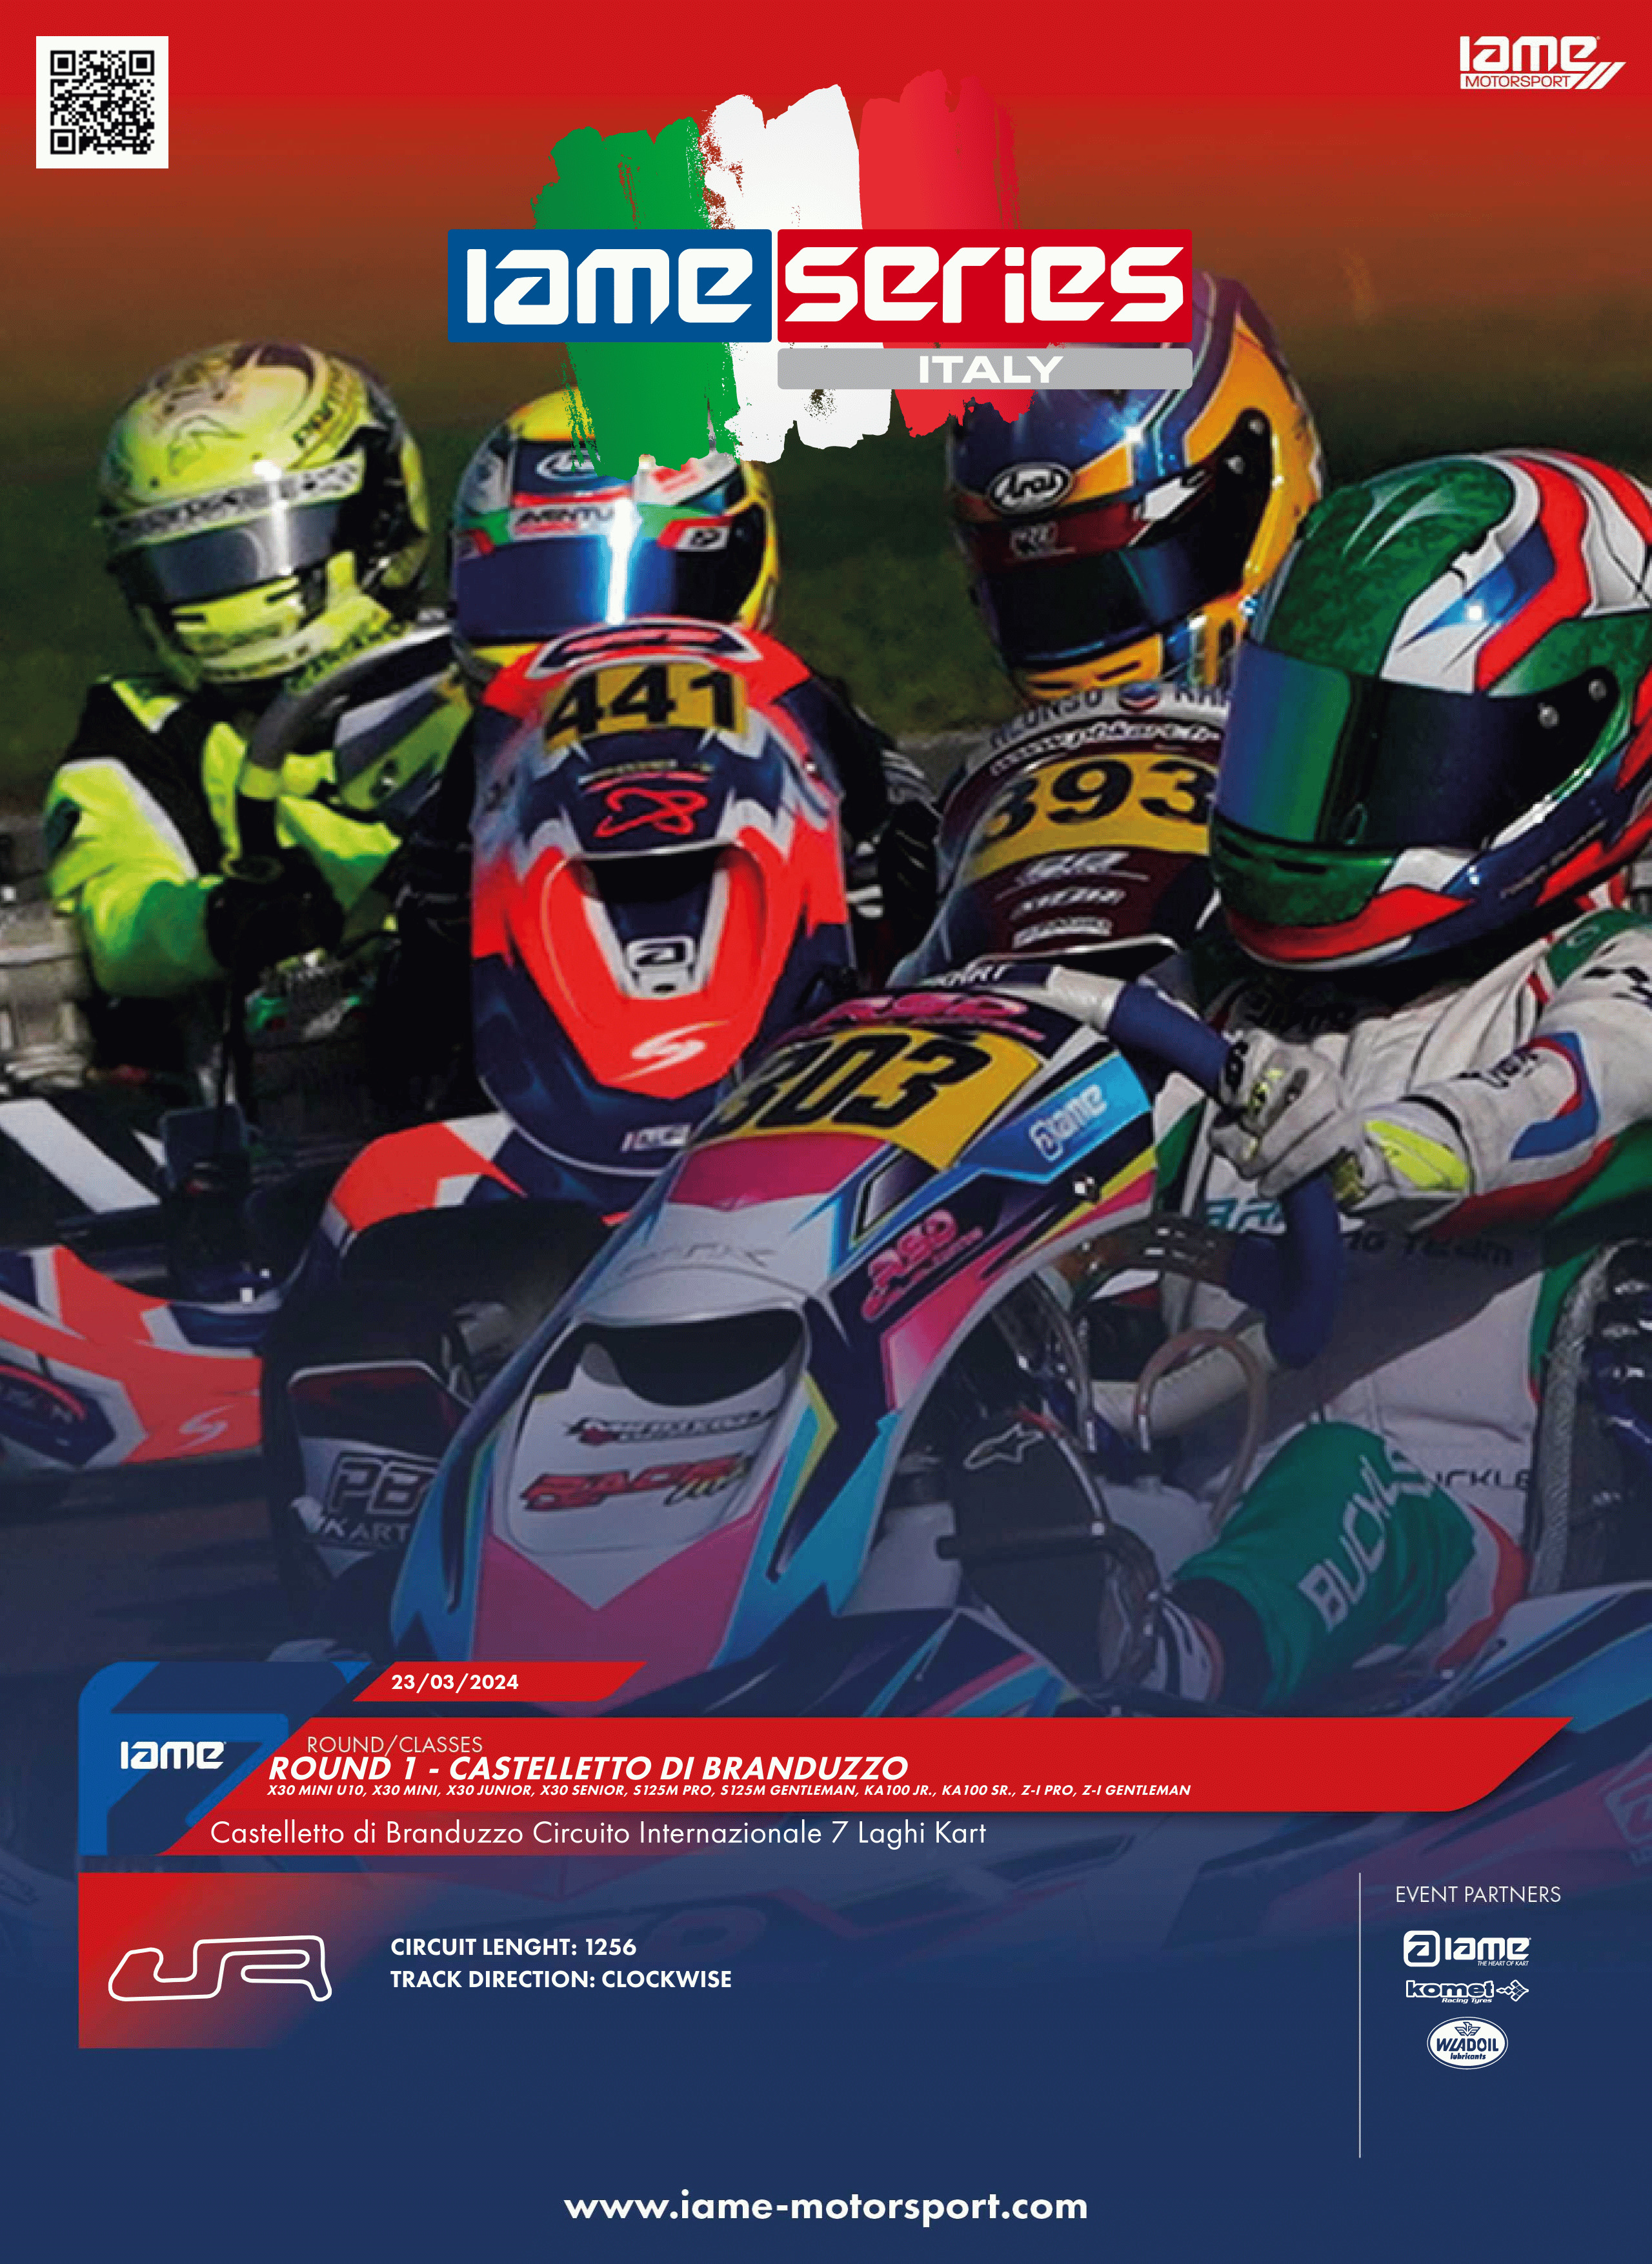 Round 1 - Castelletto di Branduzzo: The Thrill of Karting with Iame Series Italy